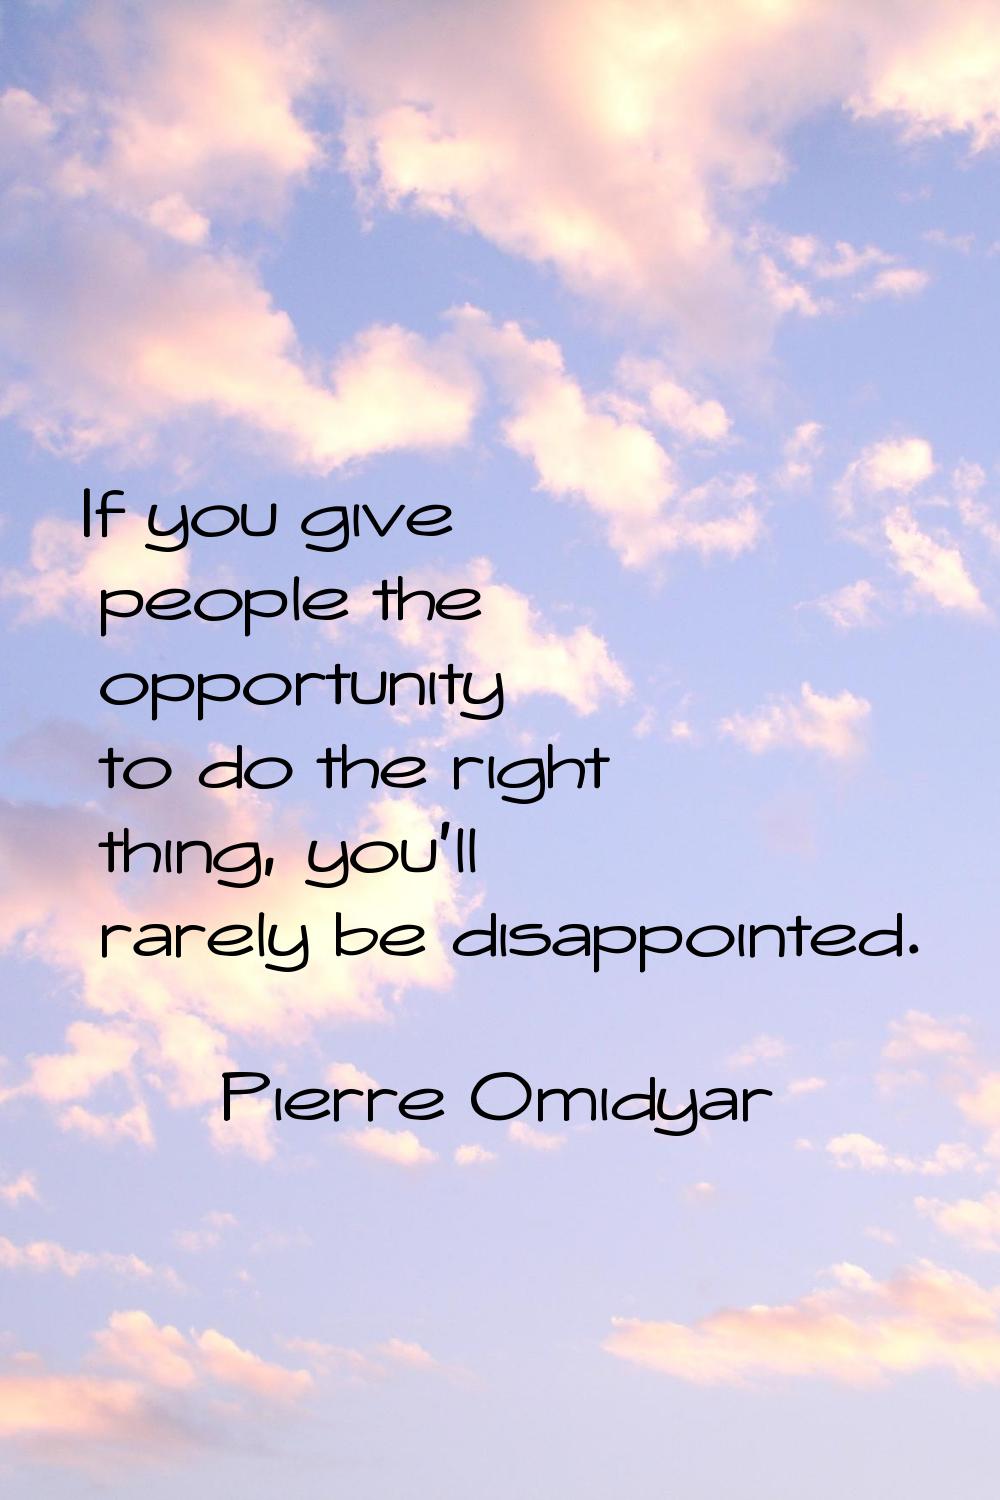 If you give people the opportunity to do the right thing, you'll rarely be disappointed.